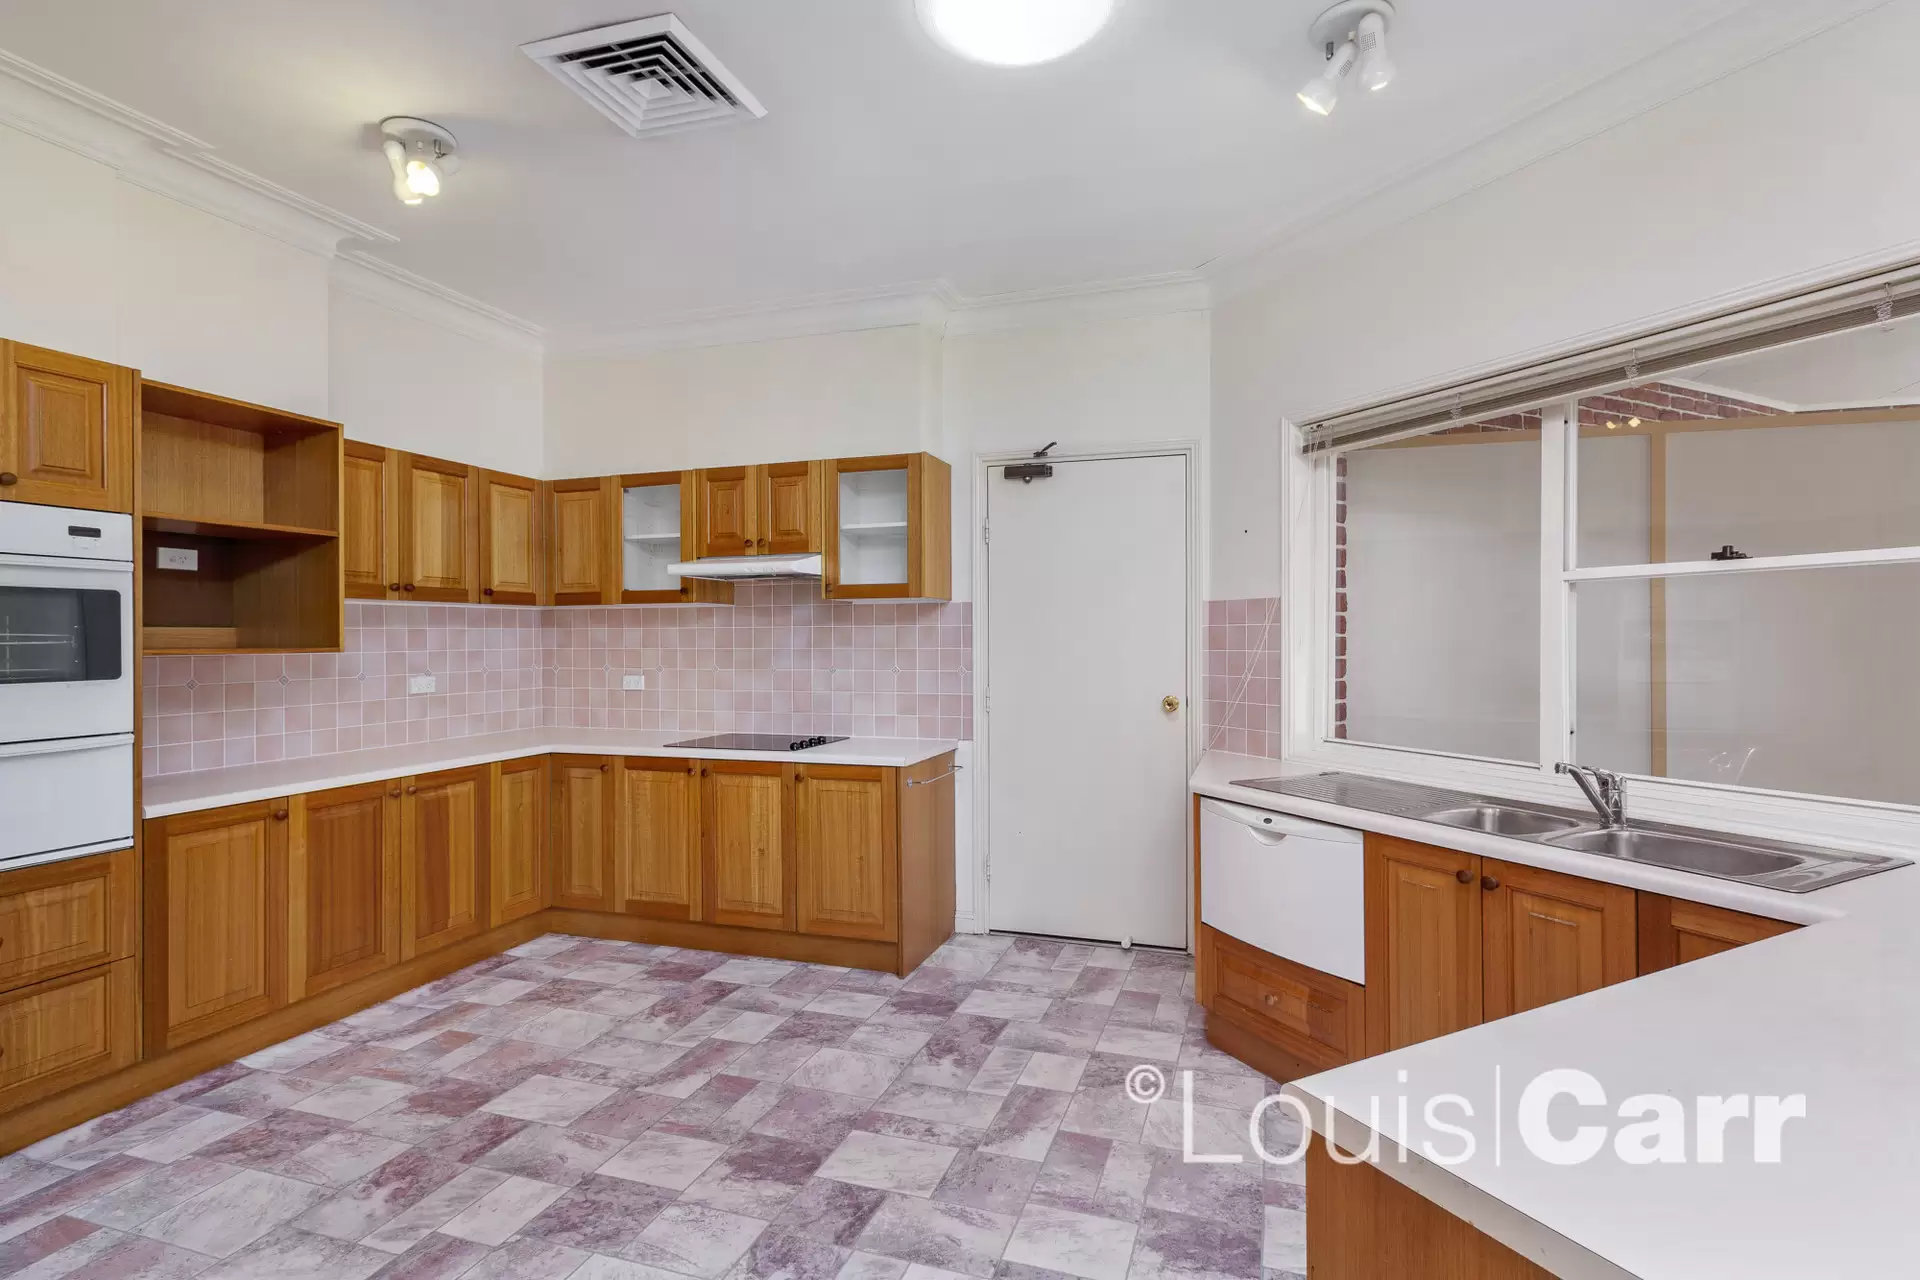 76B Alana Drive, West Pennant Hills Leased by Louis Carr Real Estate - image 3